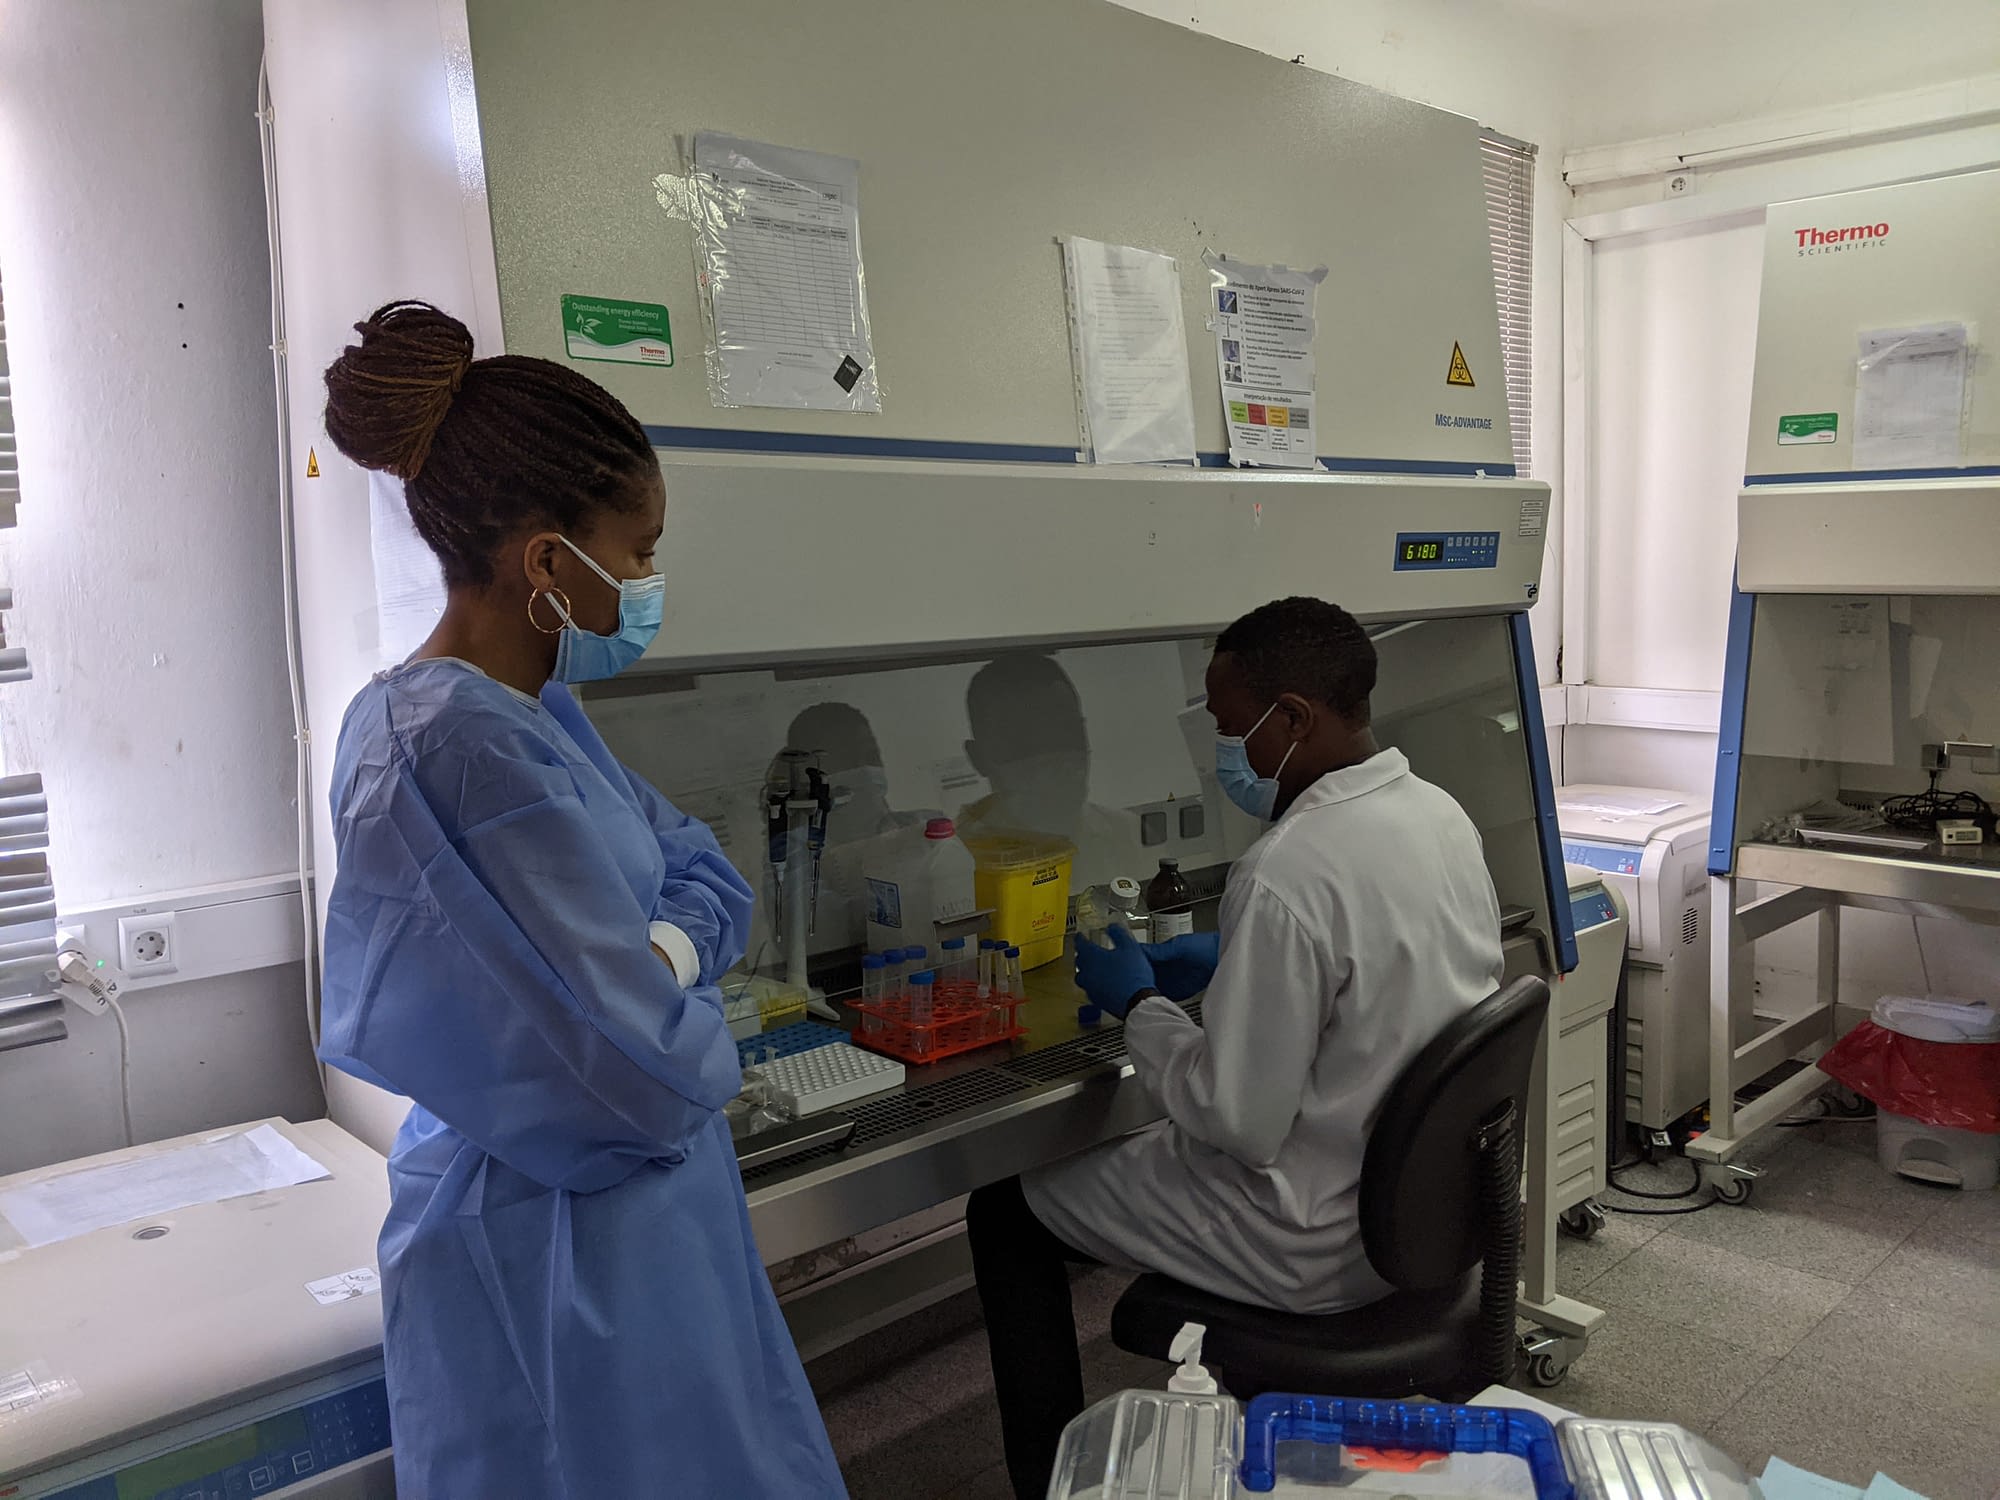 Healthcare workers in a lab setting